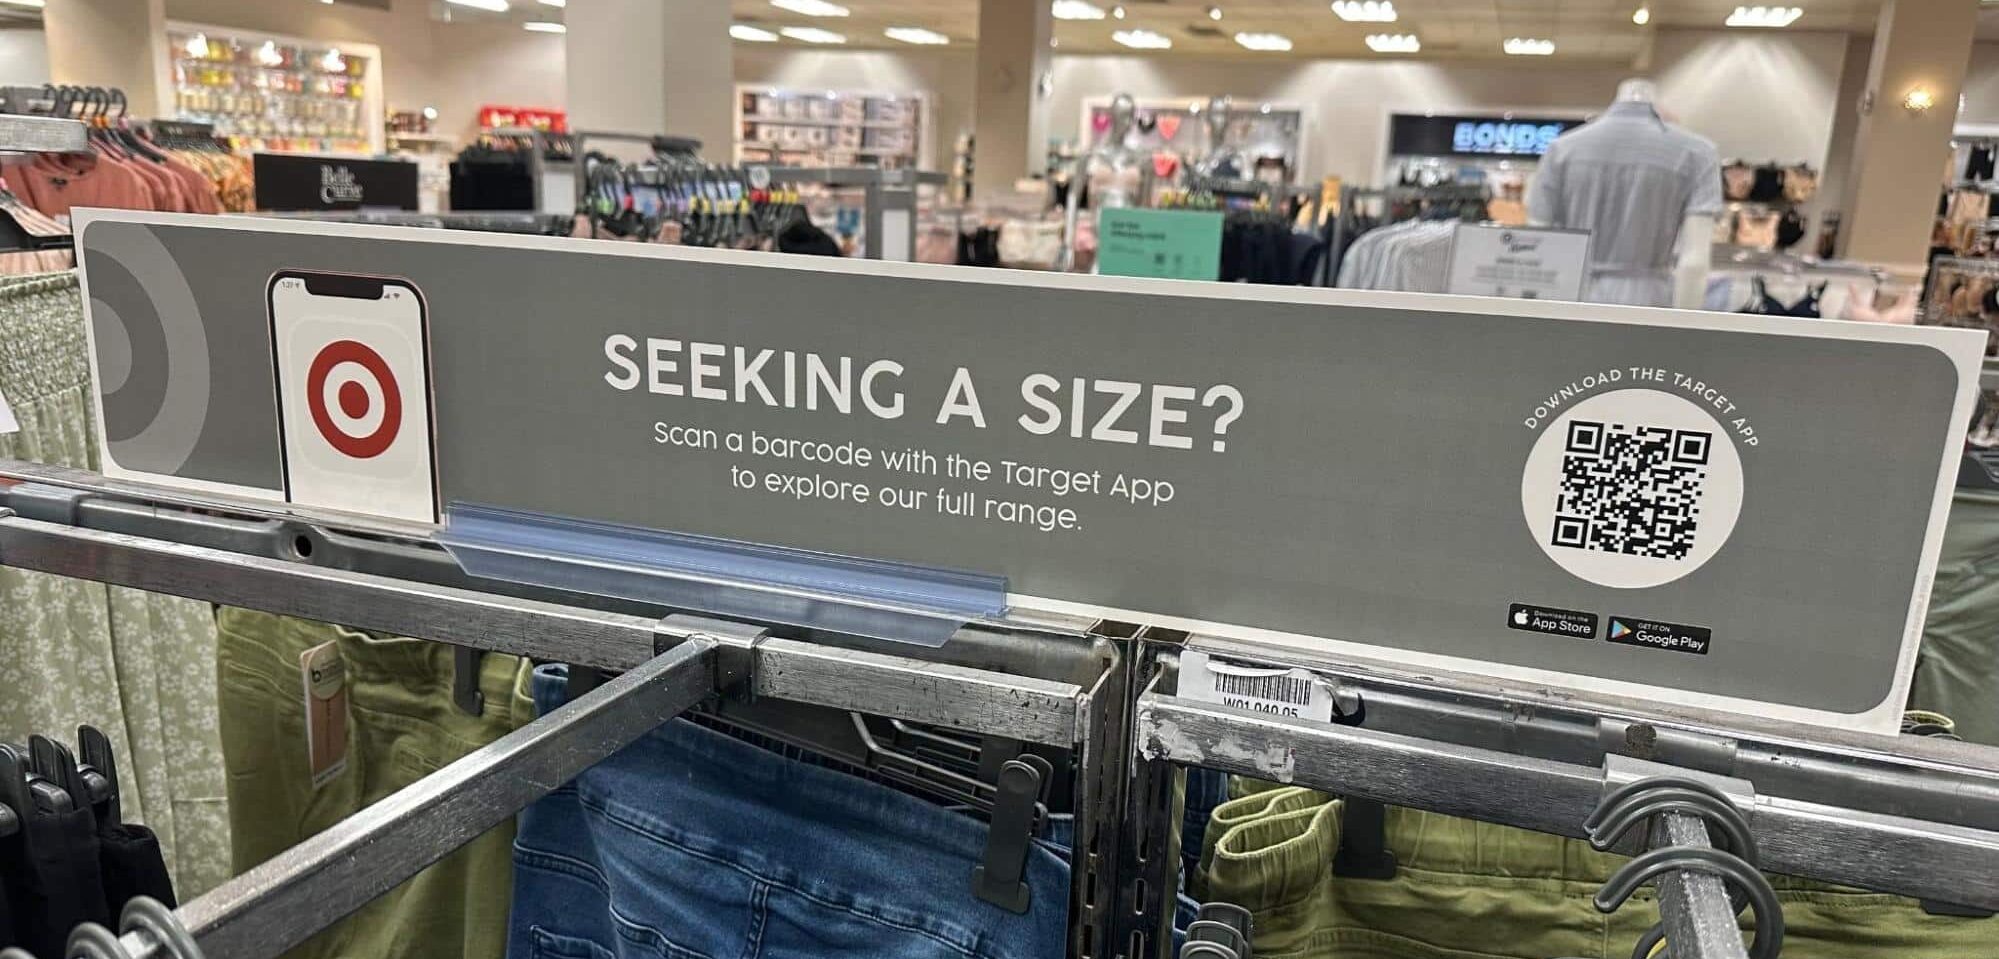 Target in-store QR code displayed on a clothing rack: "Seeking a size?"